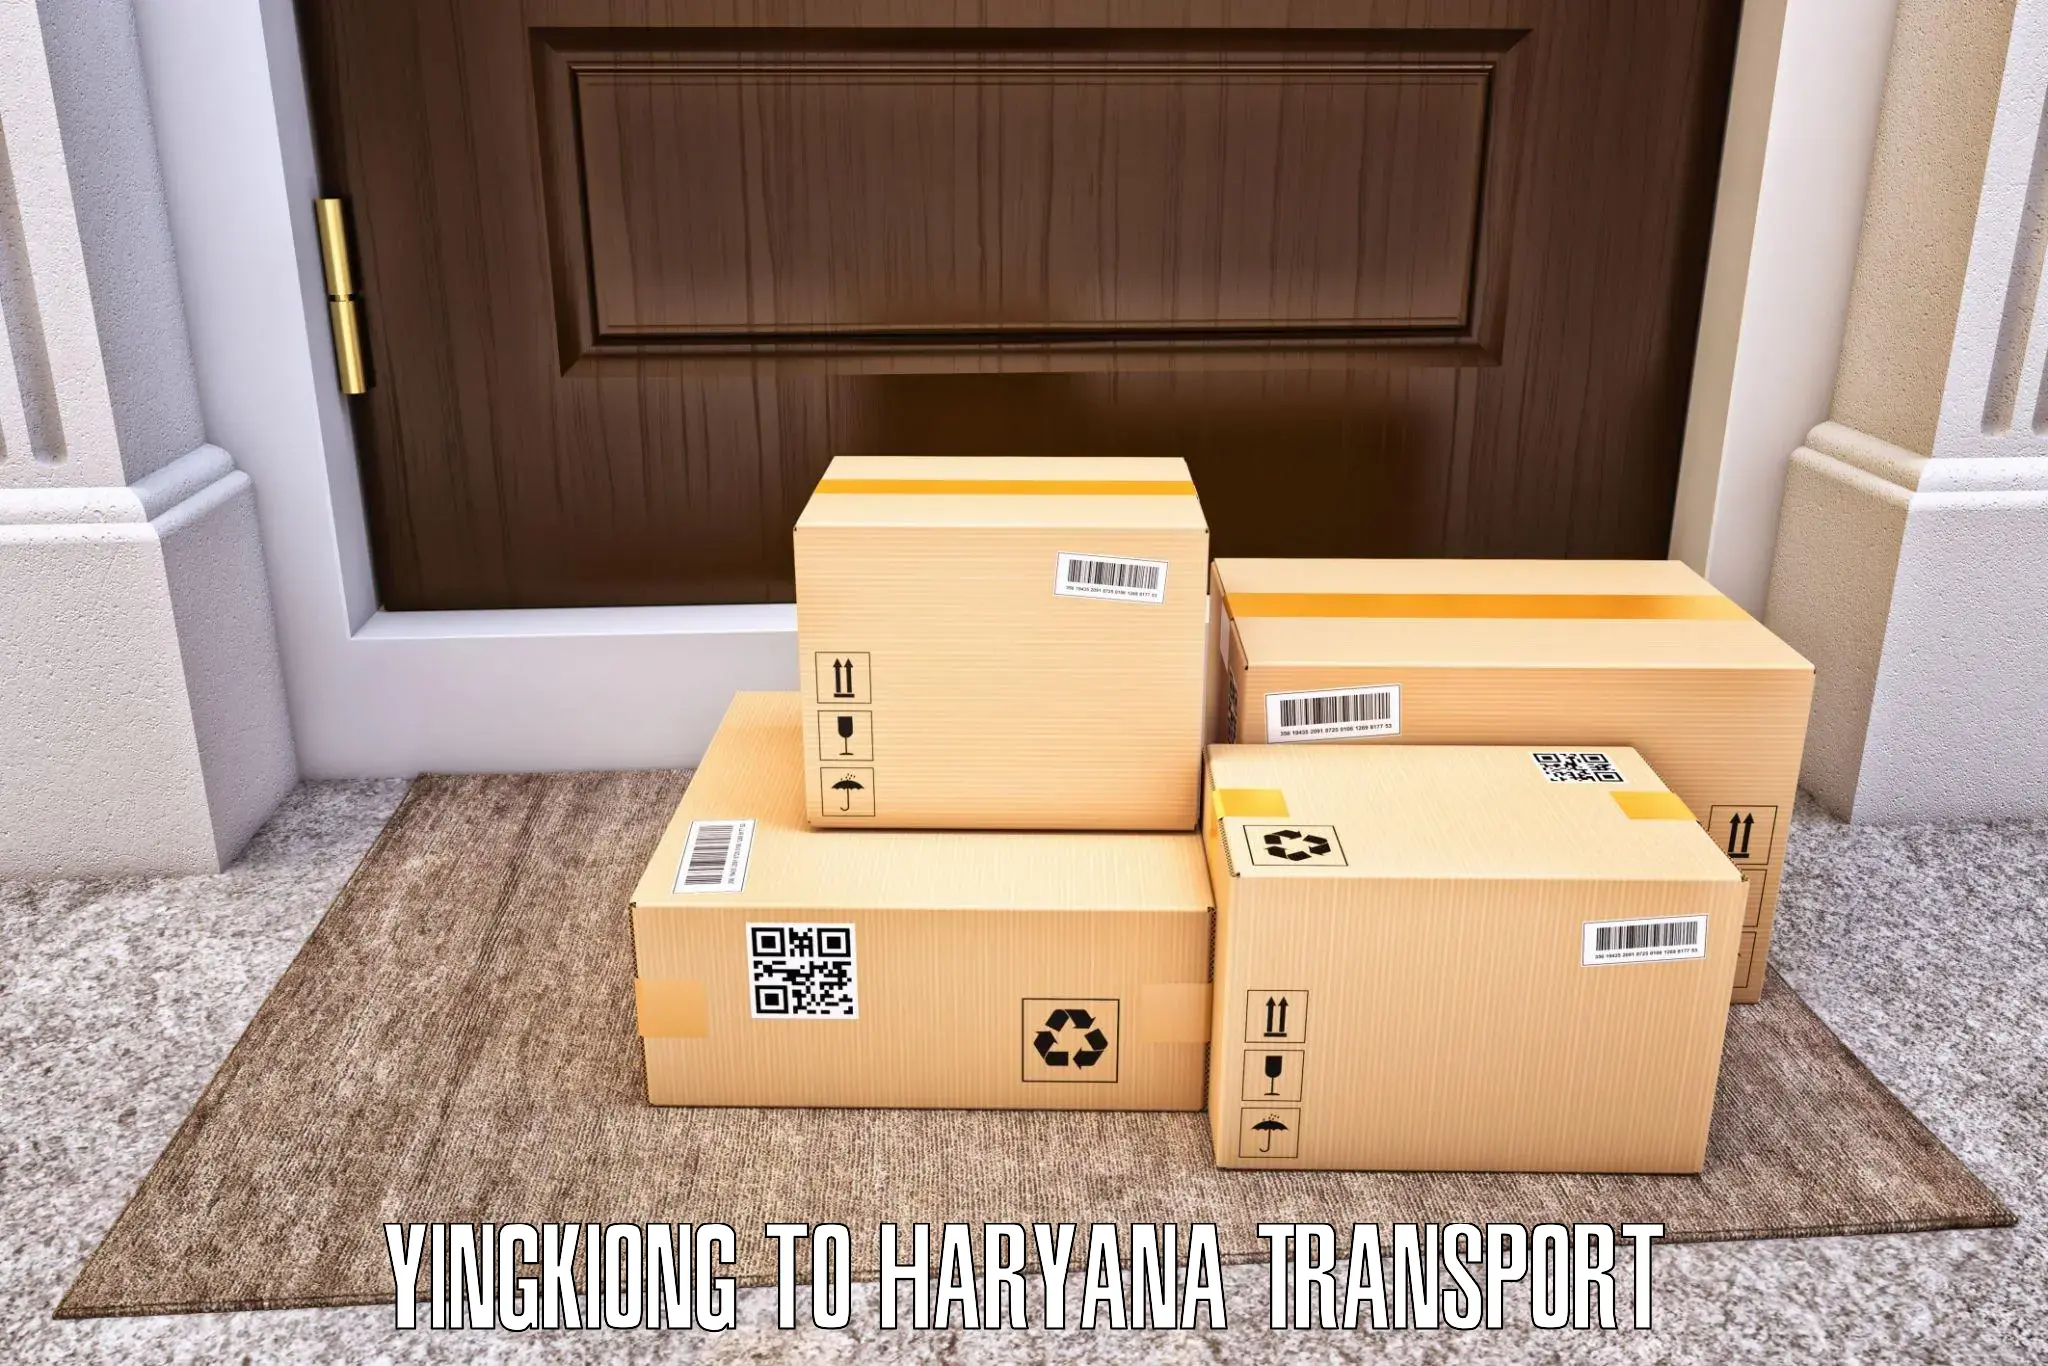 Shipping services in Yingkiong to Julana